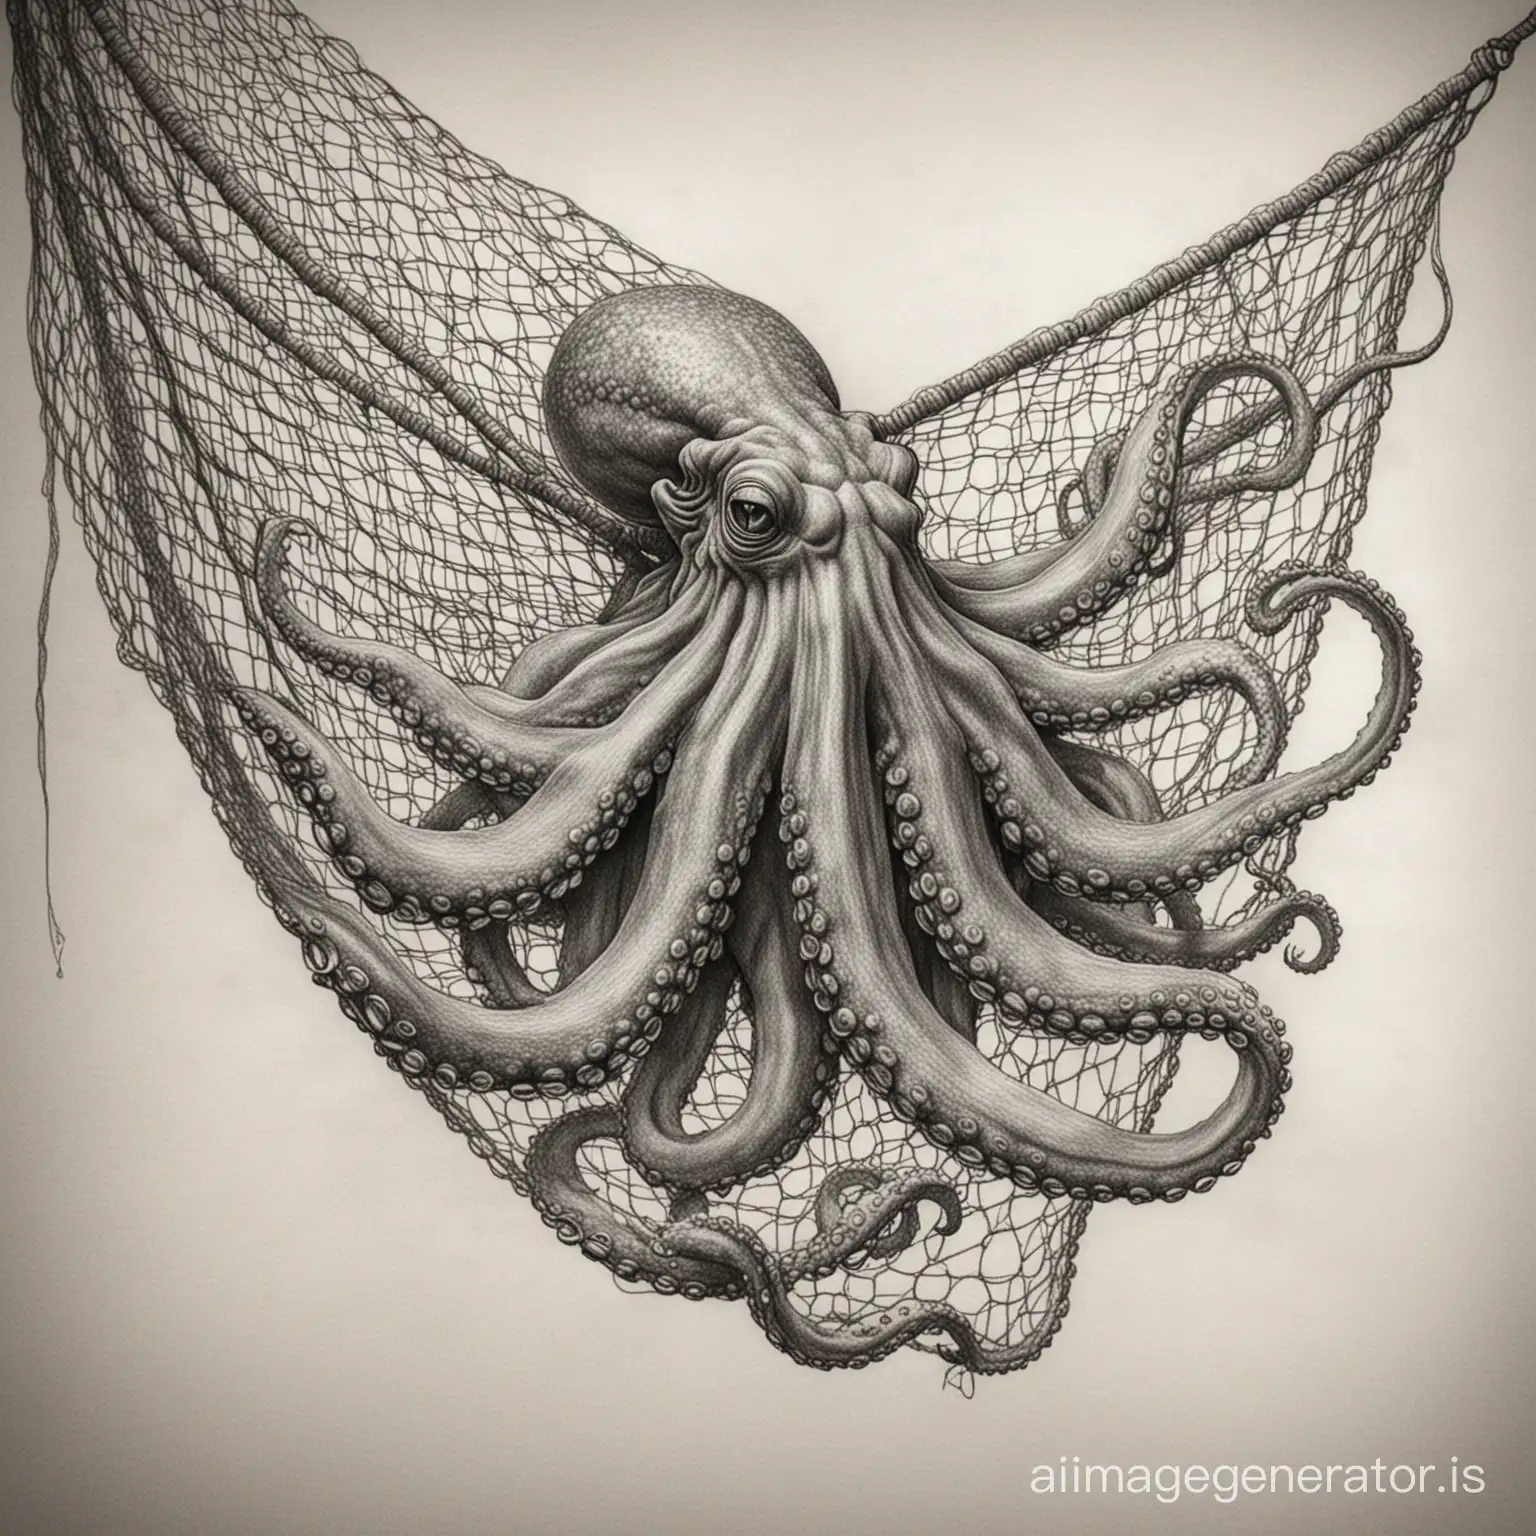 Pencil sketch of a octopus stuck inba fishmans net, ultra realistic drawing style